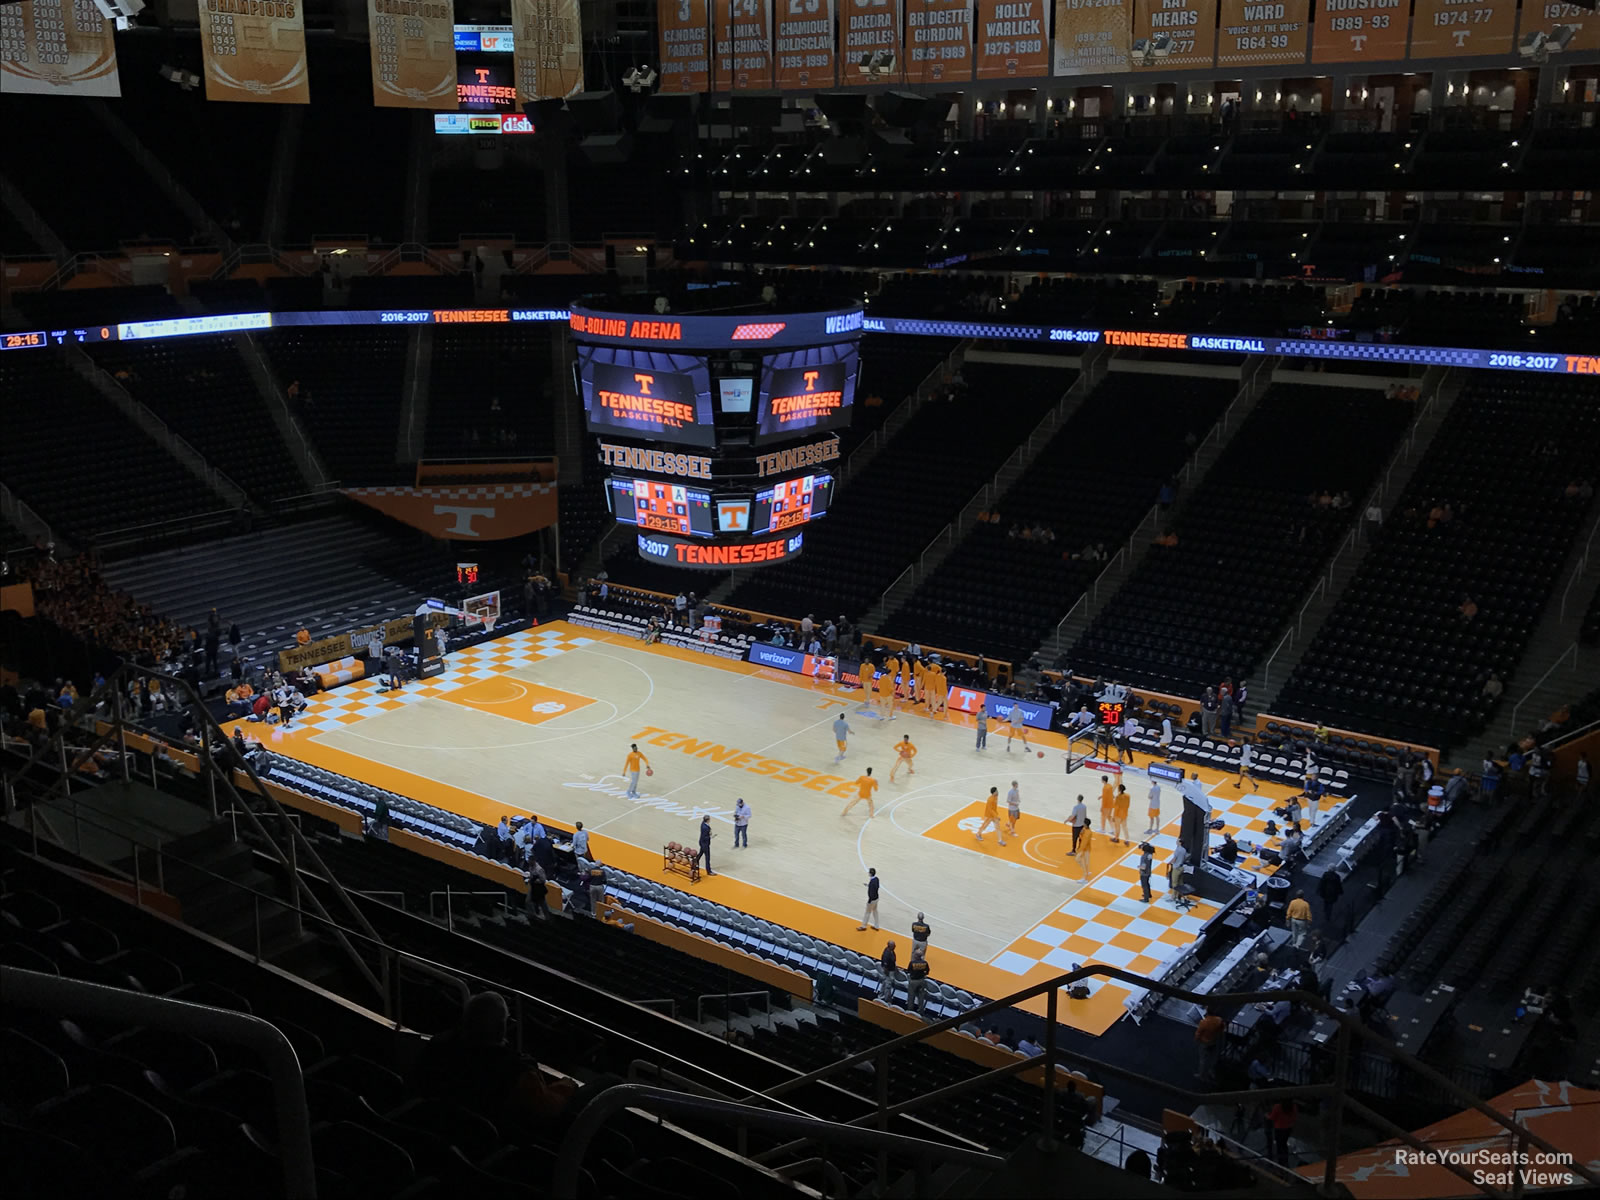 section 317a, row 7 seat view  - thompson-boling arena